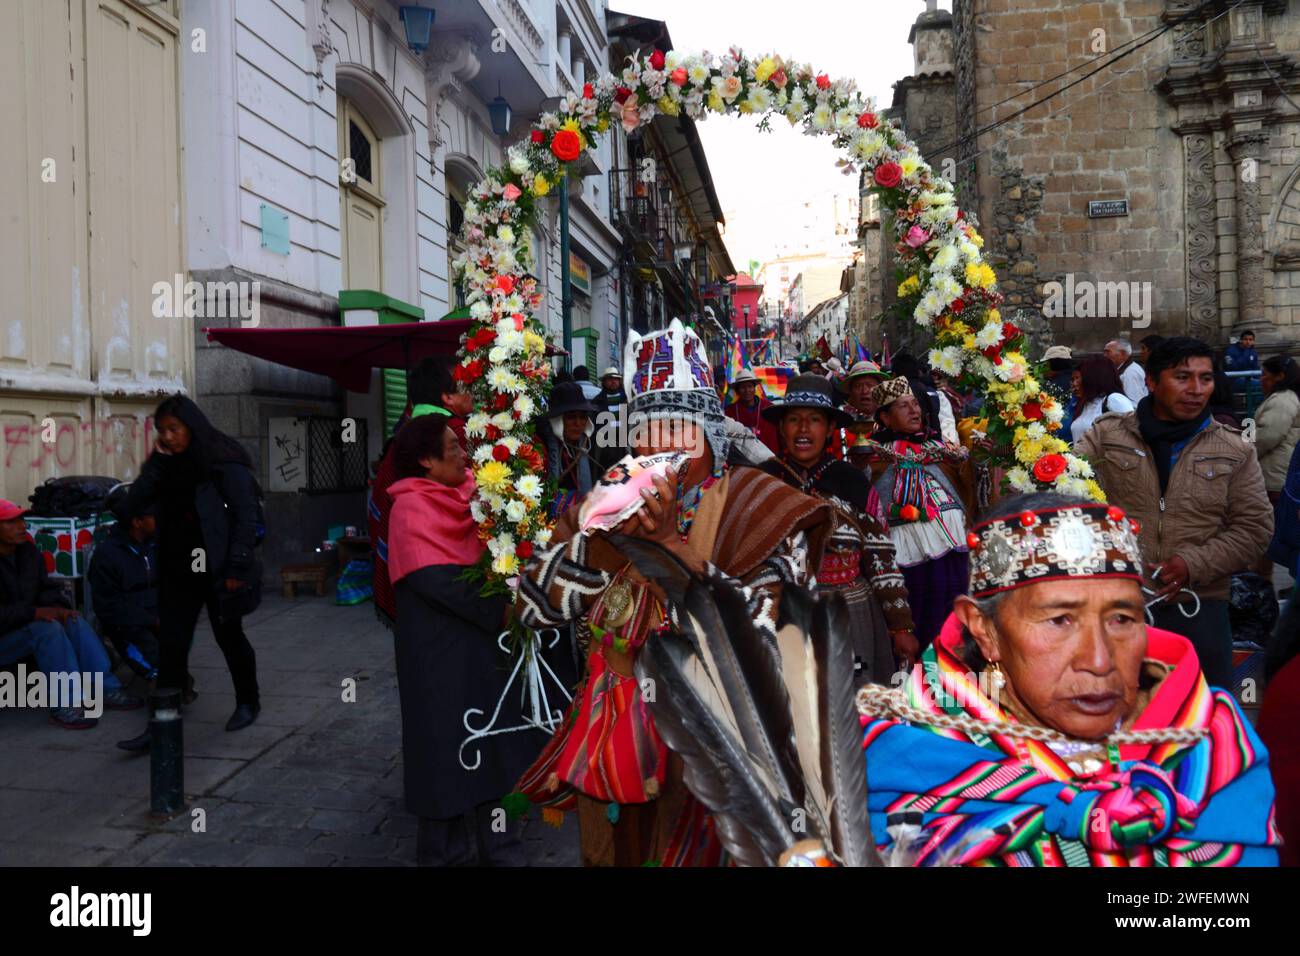 La Paz, BOLIVIA; 24th January 2015. An Aymara shaman blows a conch shell as he walks in front of an ancient illa (or statue) of an Ekeko (an Aymara god of abundance) as it is paraded through the streets of La Paz to celebrate its first appearance at the Alasitas festival, which starts today. The statue is around 2000 years old and was made by the Pucara culture. It was taken from the archaeological site of Tiwanaku to Switzerland in 1858, and returned to Bolivia by the Berne History Museum in November 2014. Stock Photo